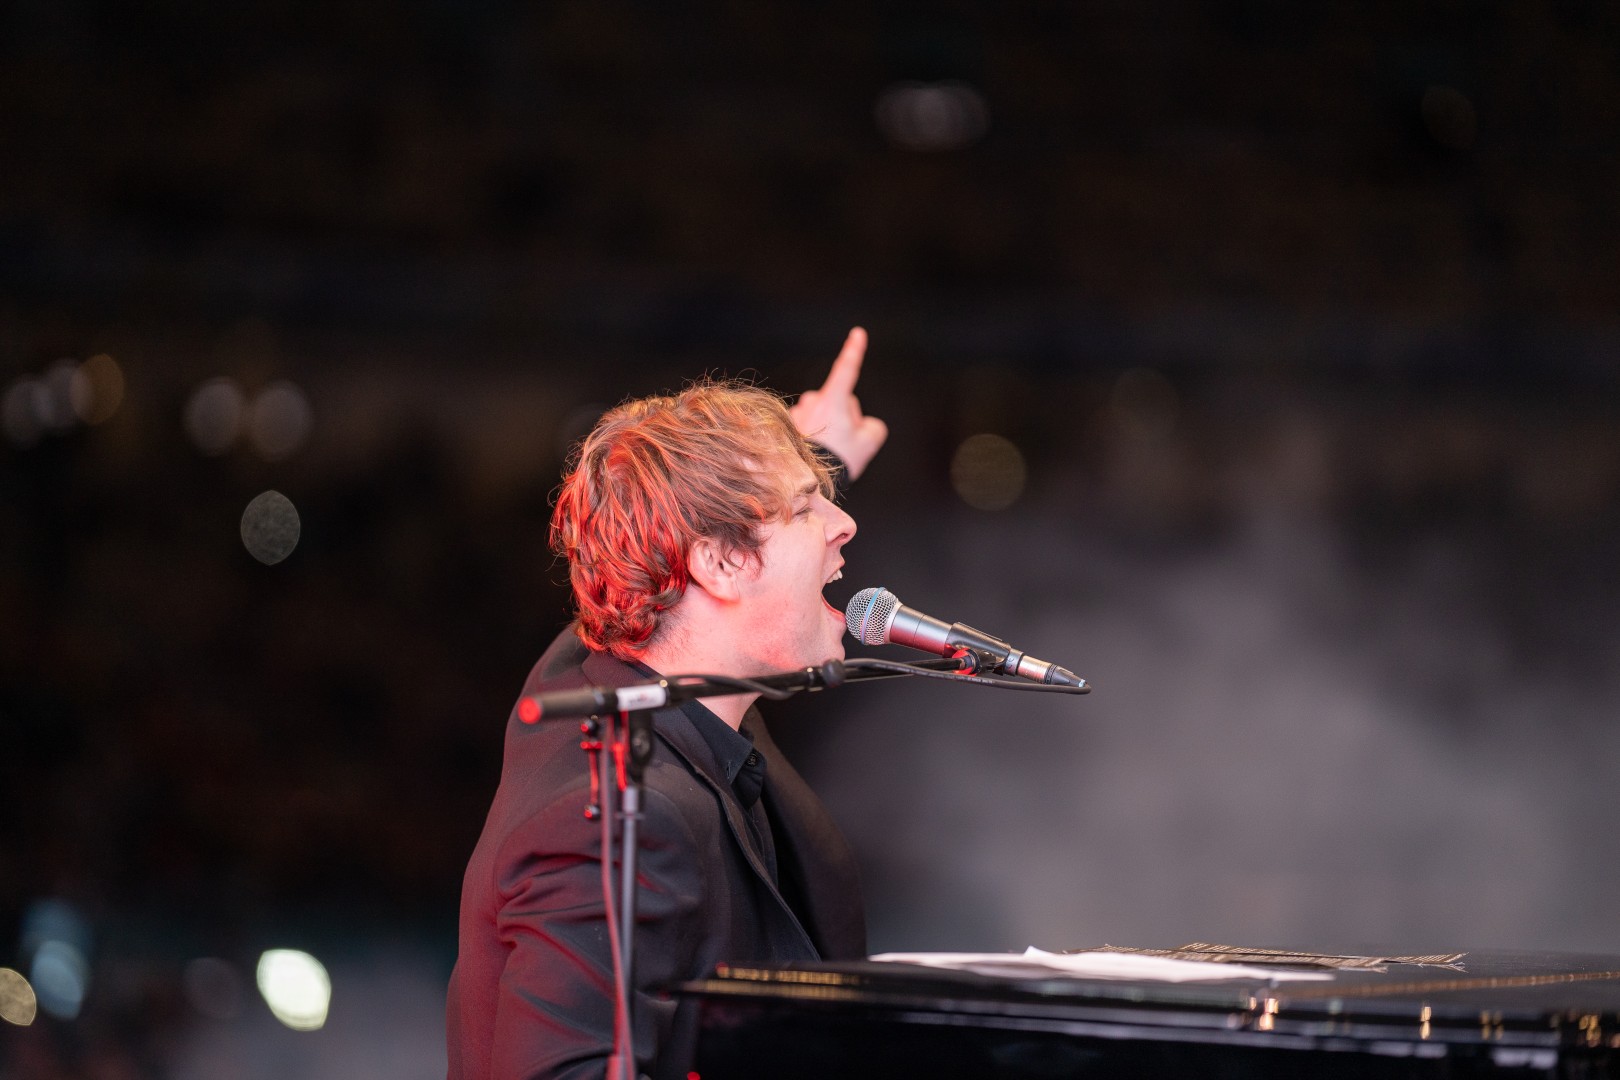 Tom Odell at National Arena in Bucharest on March 12, 2022 (eda201e677)